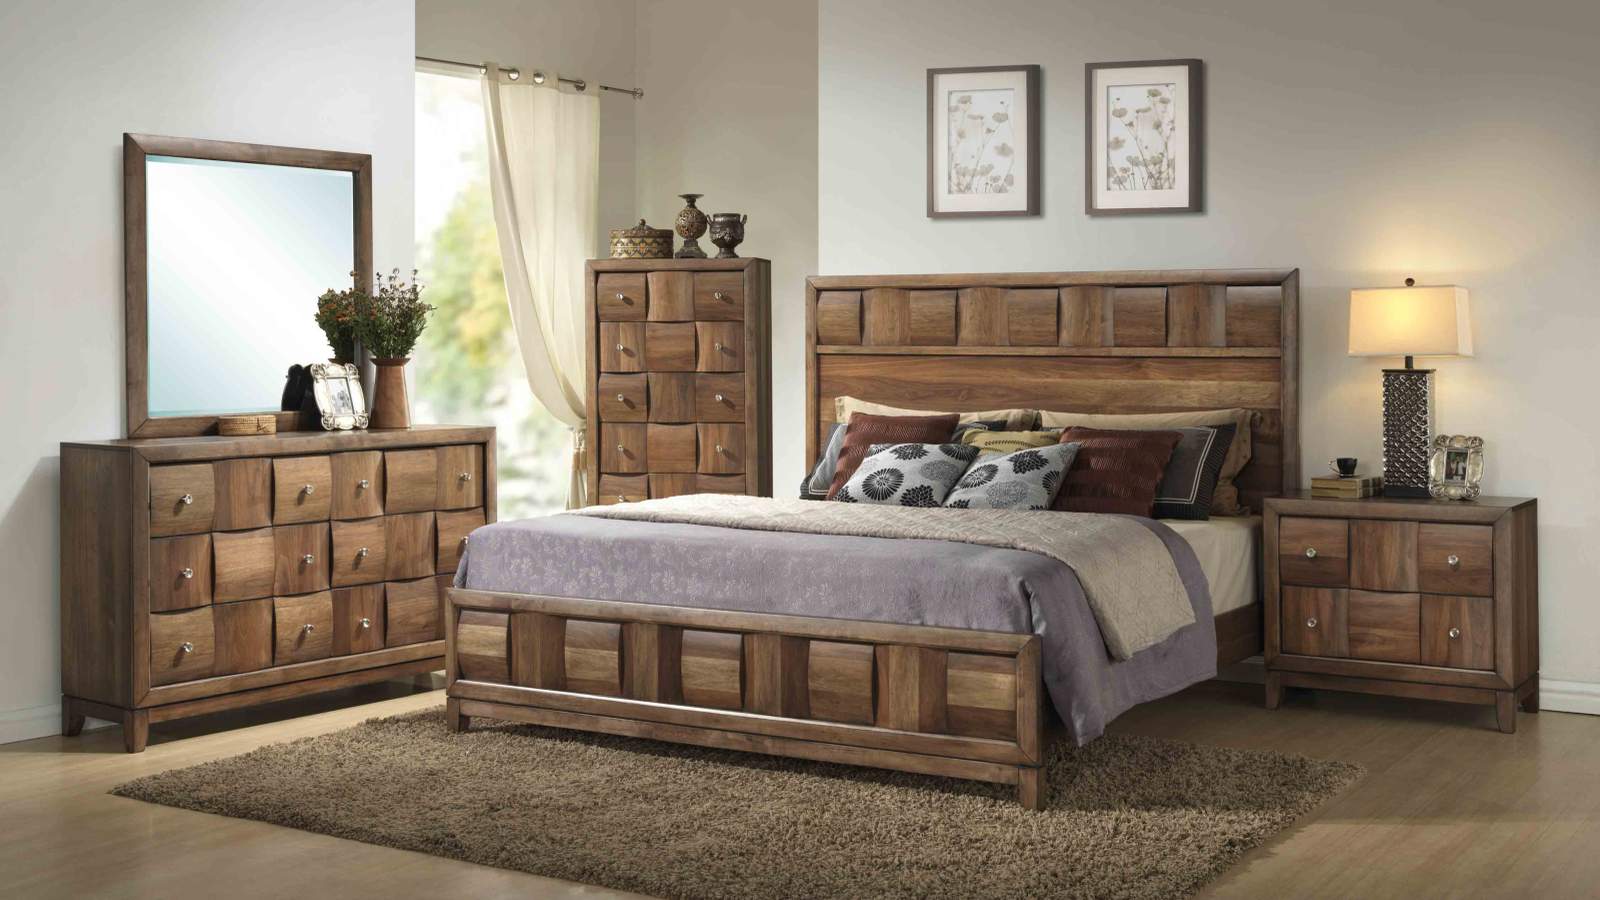 19 Ideas Of Solid Wood Bedroom Furniture As Great Furniture Ideas